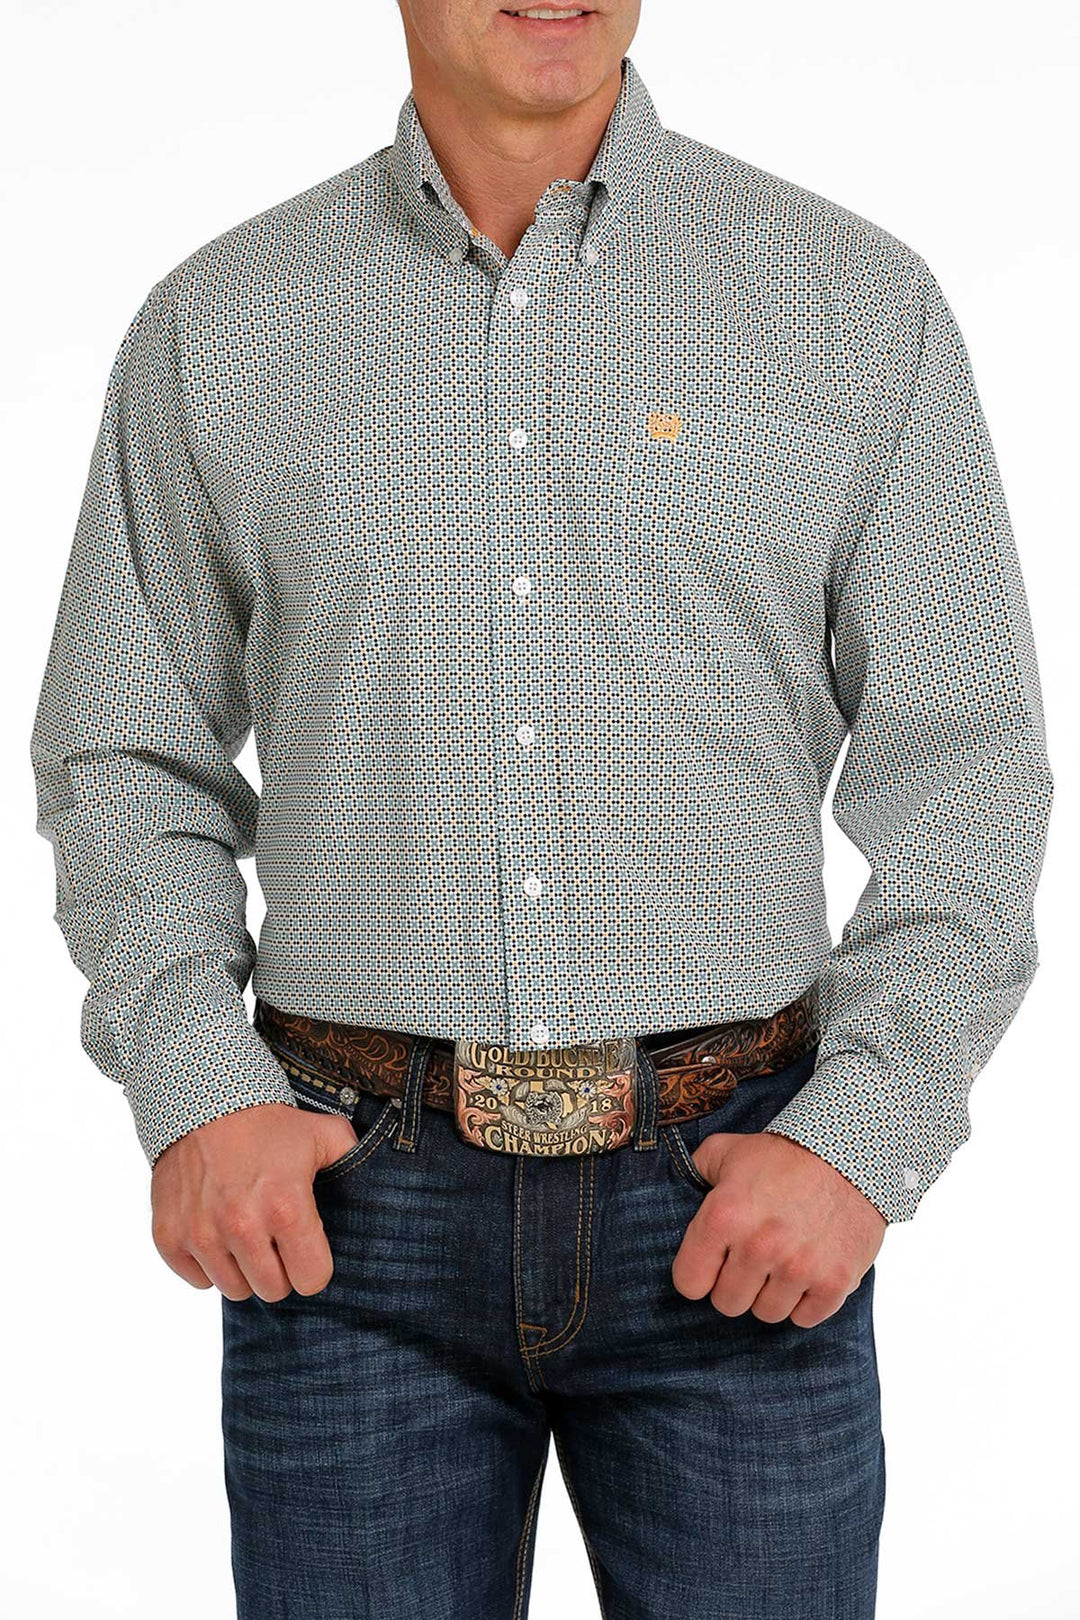 Turquoise and Gold Geo Men's Cinch Long Sleeve